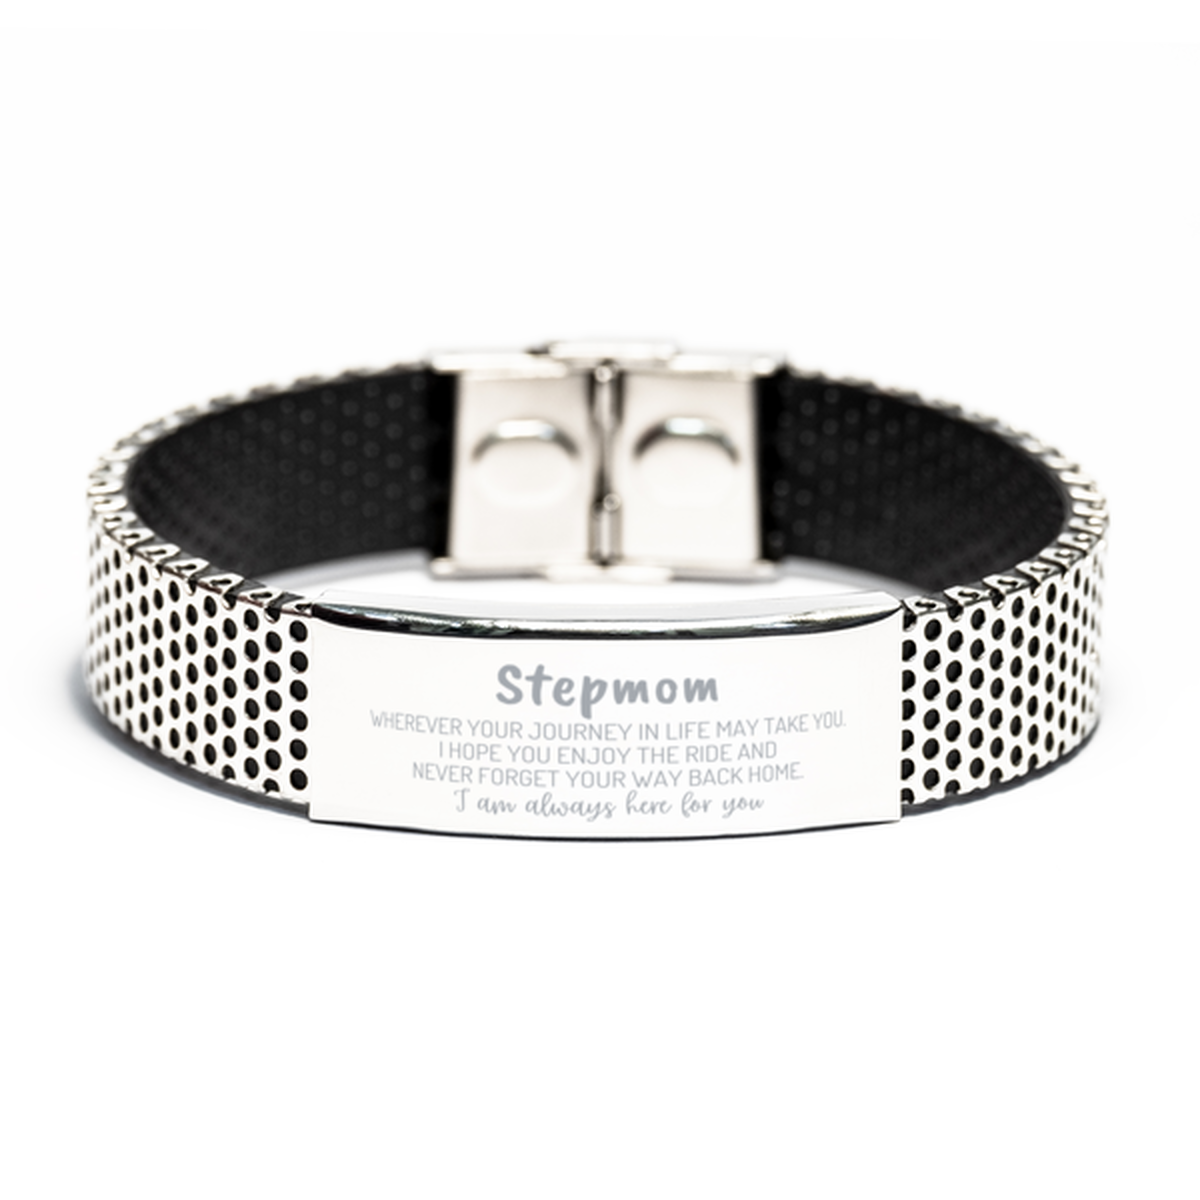 Stepmom wherever your journey in life may take you, I am always here for you Stepmom Stainless Steel Bracelet, Awesome Christmas Gifts For Stepmom, Stepmom Birthday Gifts for Men Women Family Loved One